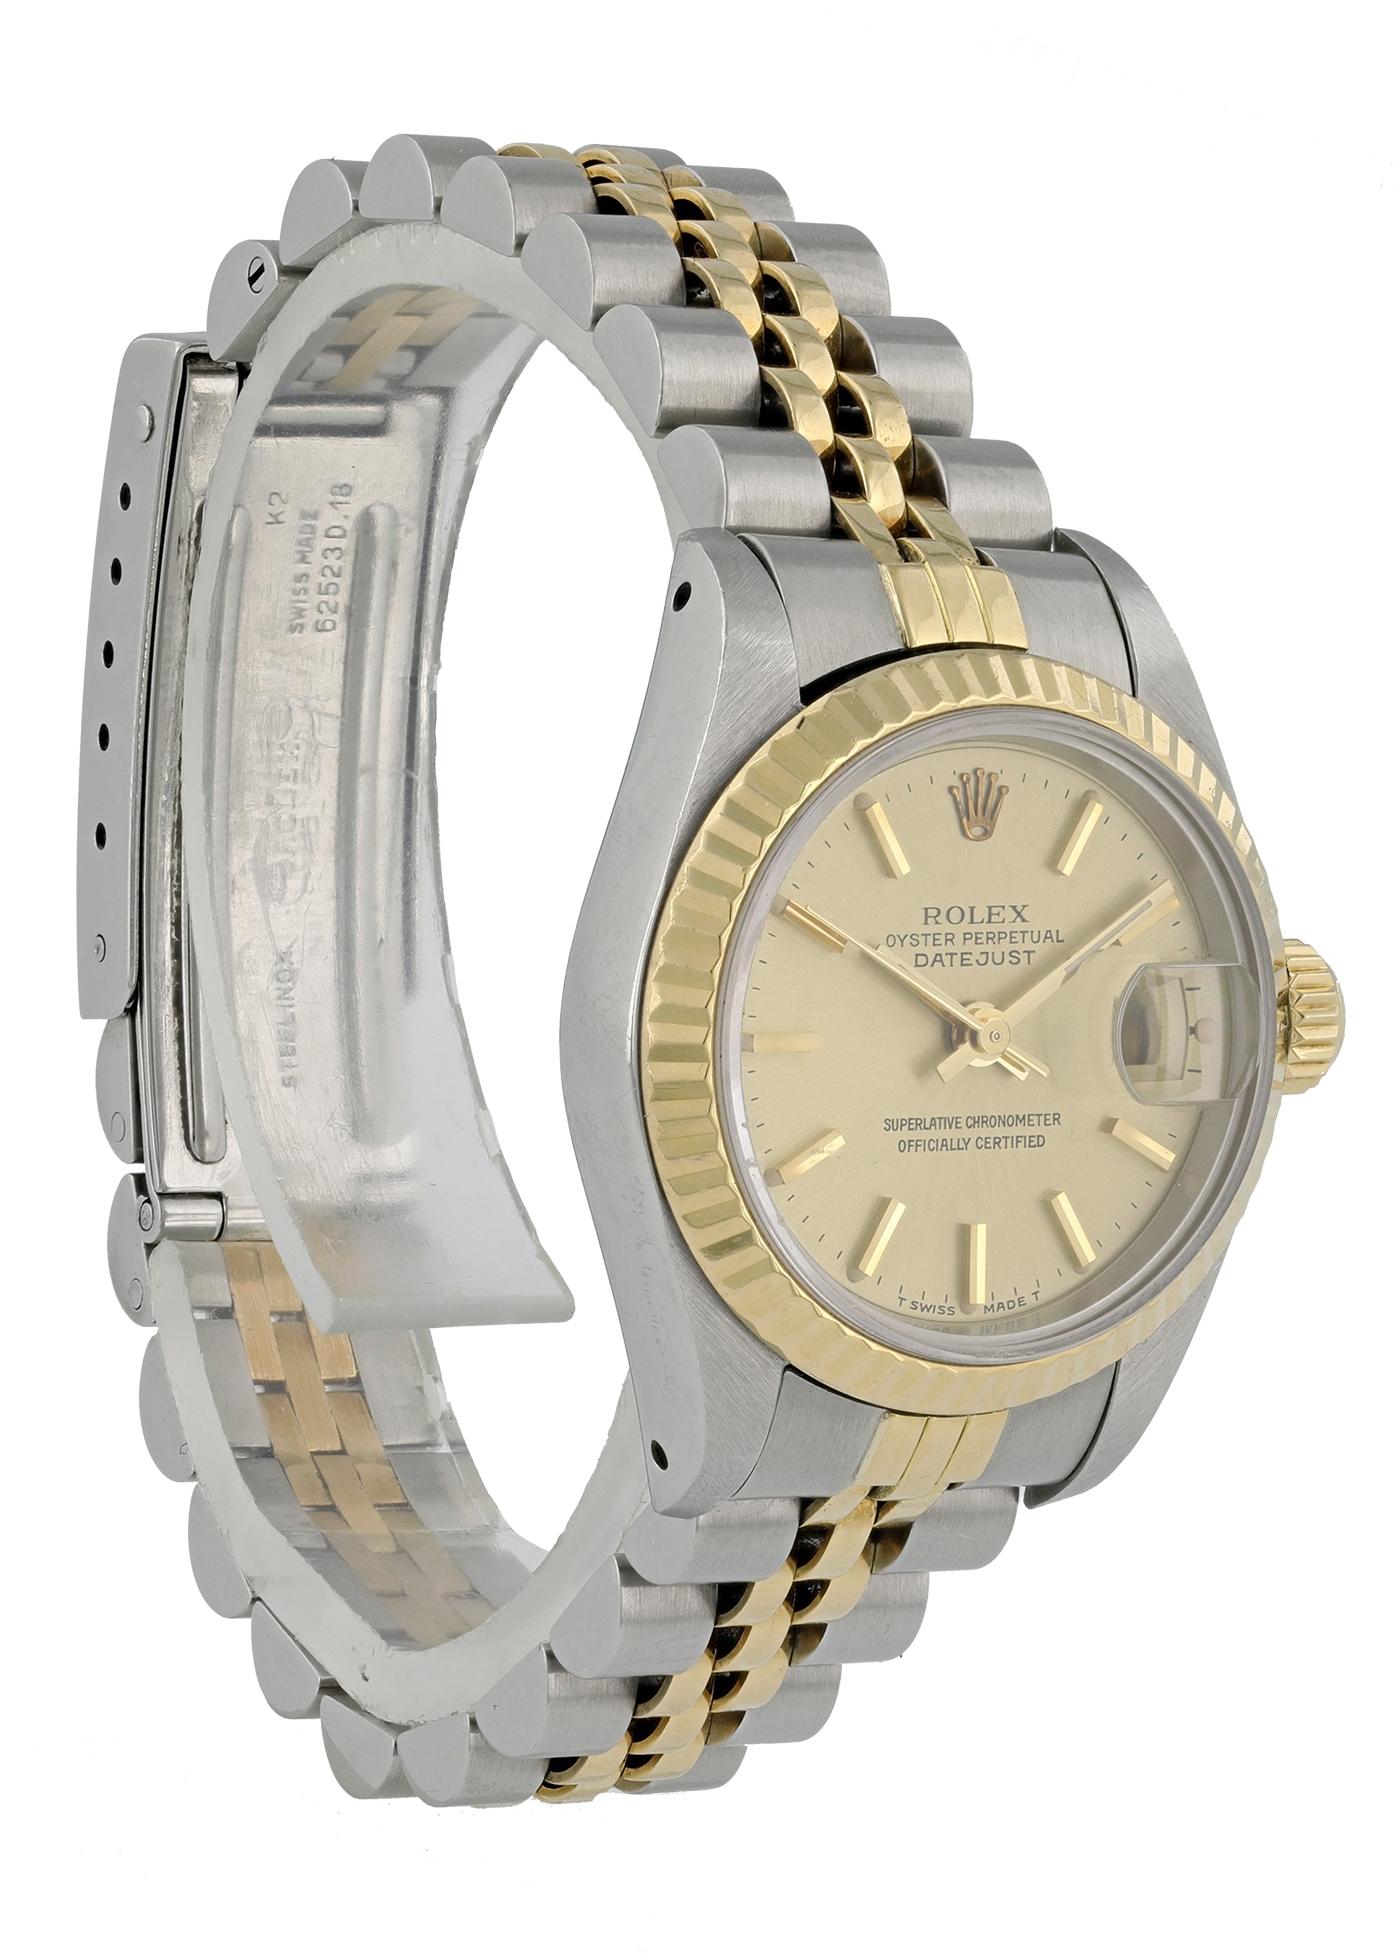 Rolex Datejust 69173 Ladies Watch. 
26mm Stainless Steel case. 
Yellow Gold Stationary bezel. 
Champagne dial with Luminous gold hands and index hour markers. 
Minute markers on the outer dial. 
Date display at the 3 o'clock position. 
Stainless